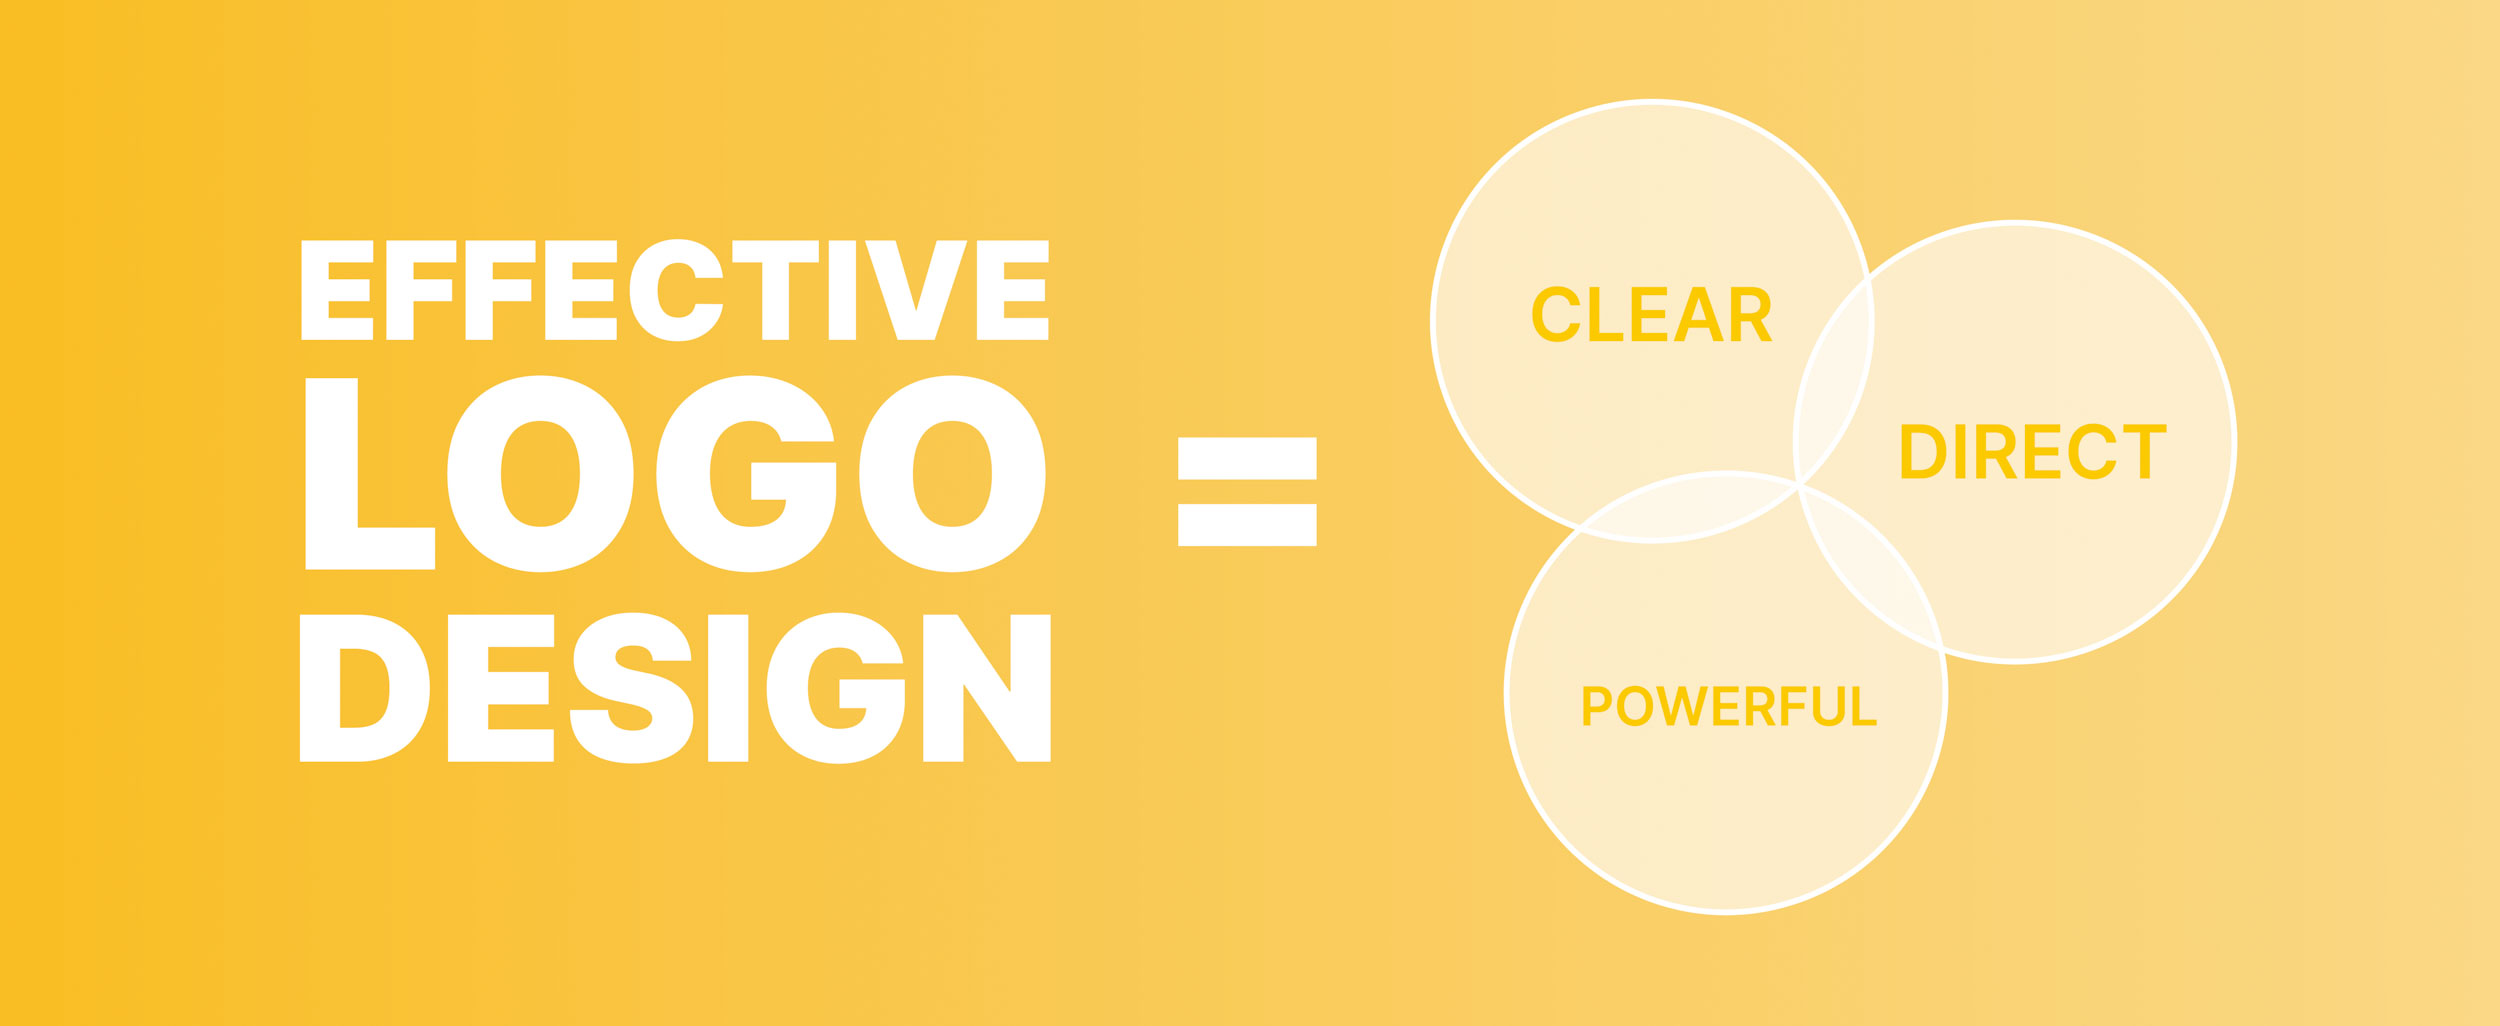 Effective Logo Design is Clear Direct and Powerful